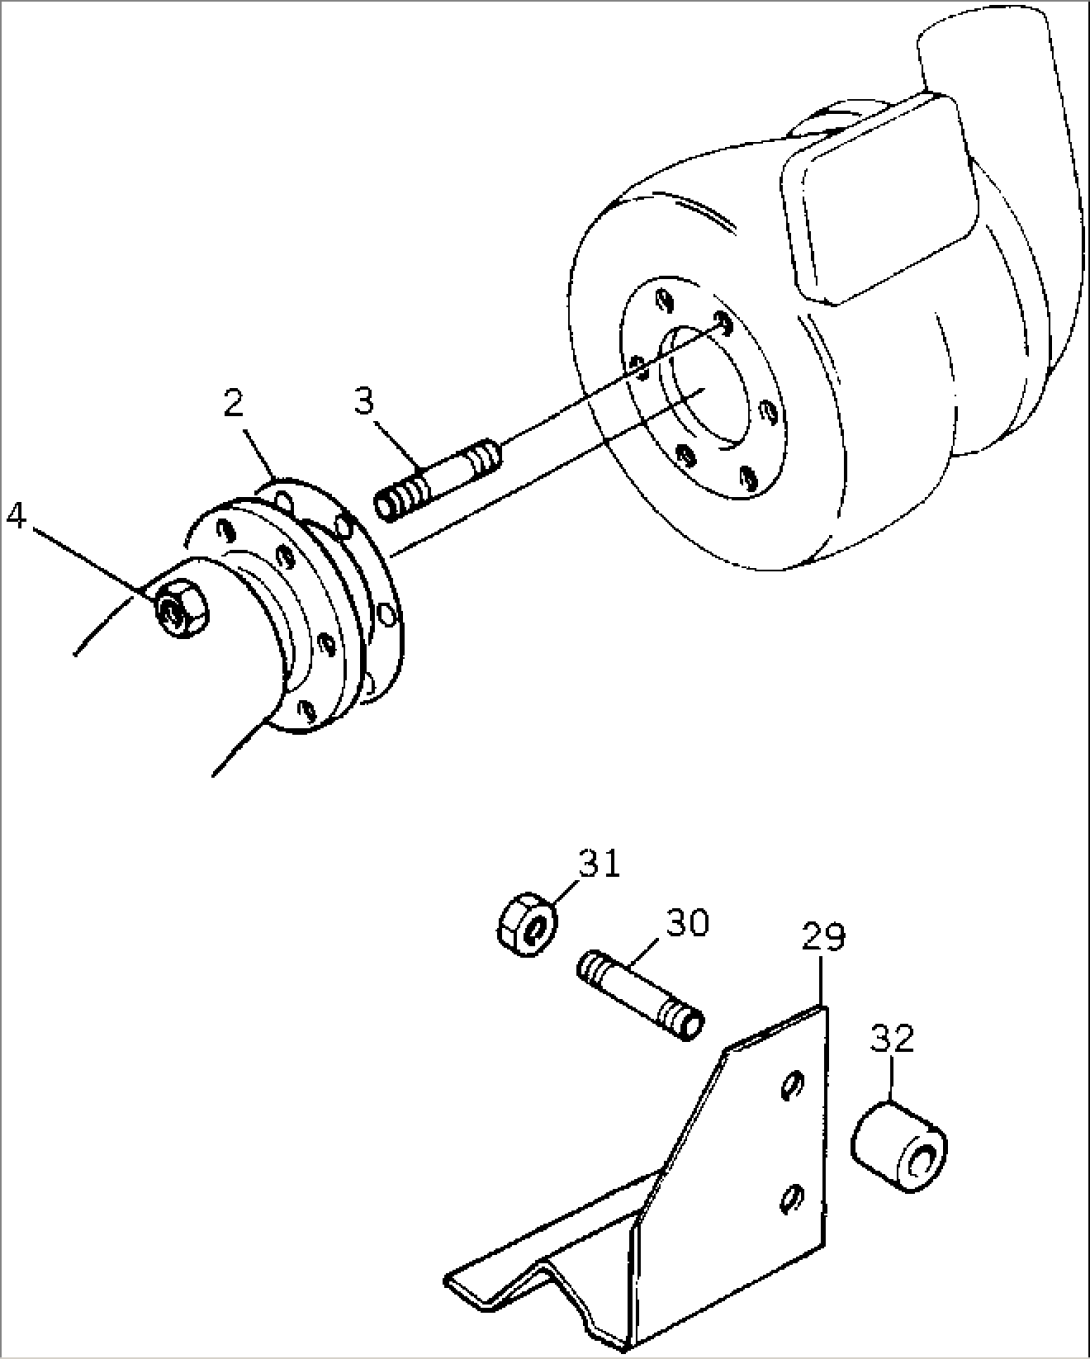 TURBOCHARGER¤ MANIFOLDS AND CHARGE COOLER